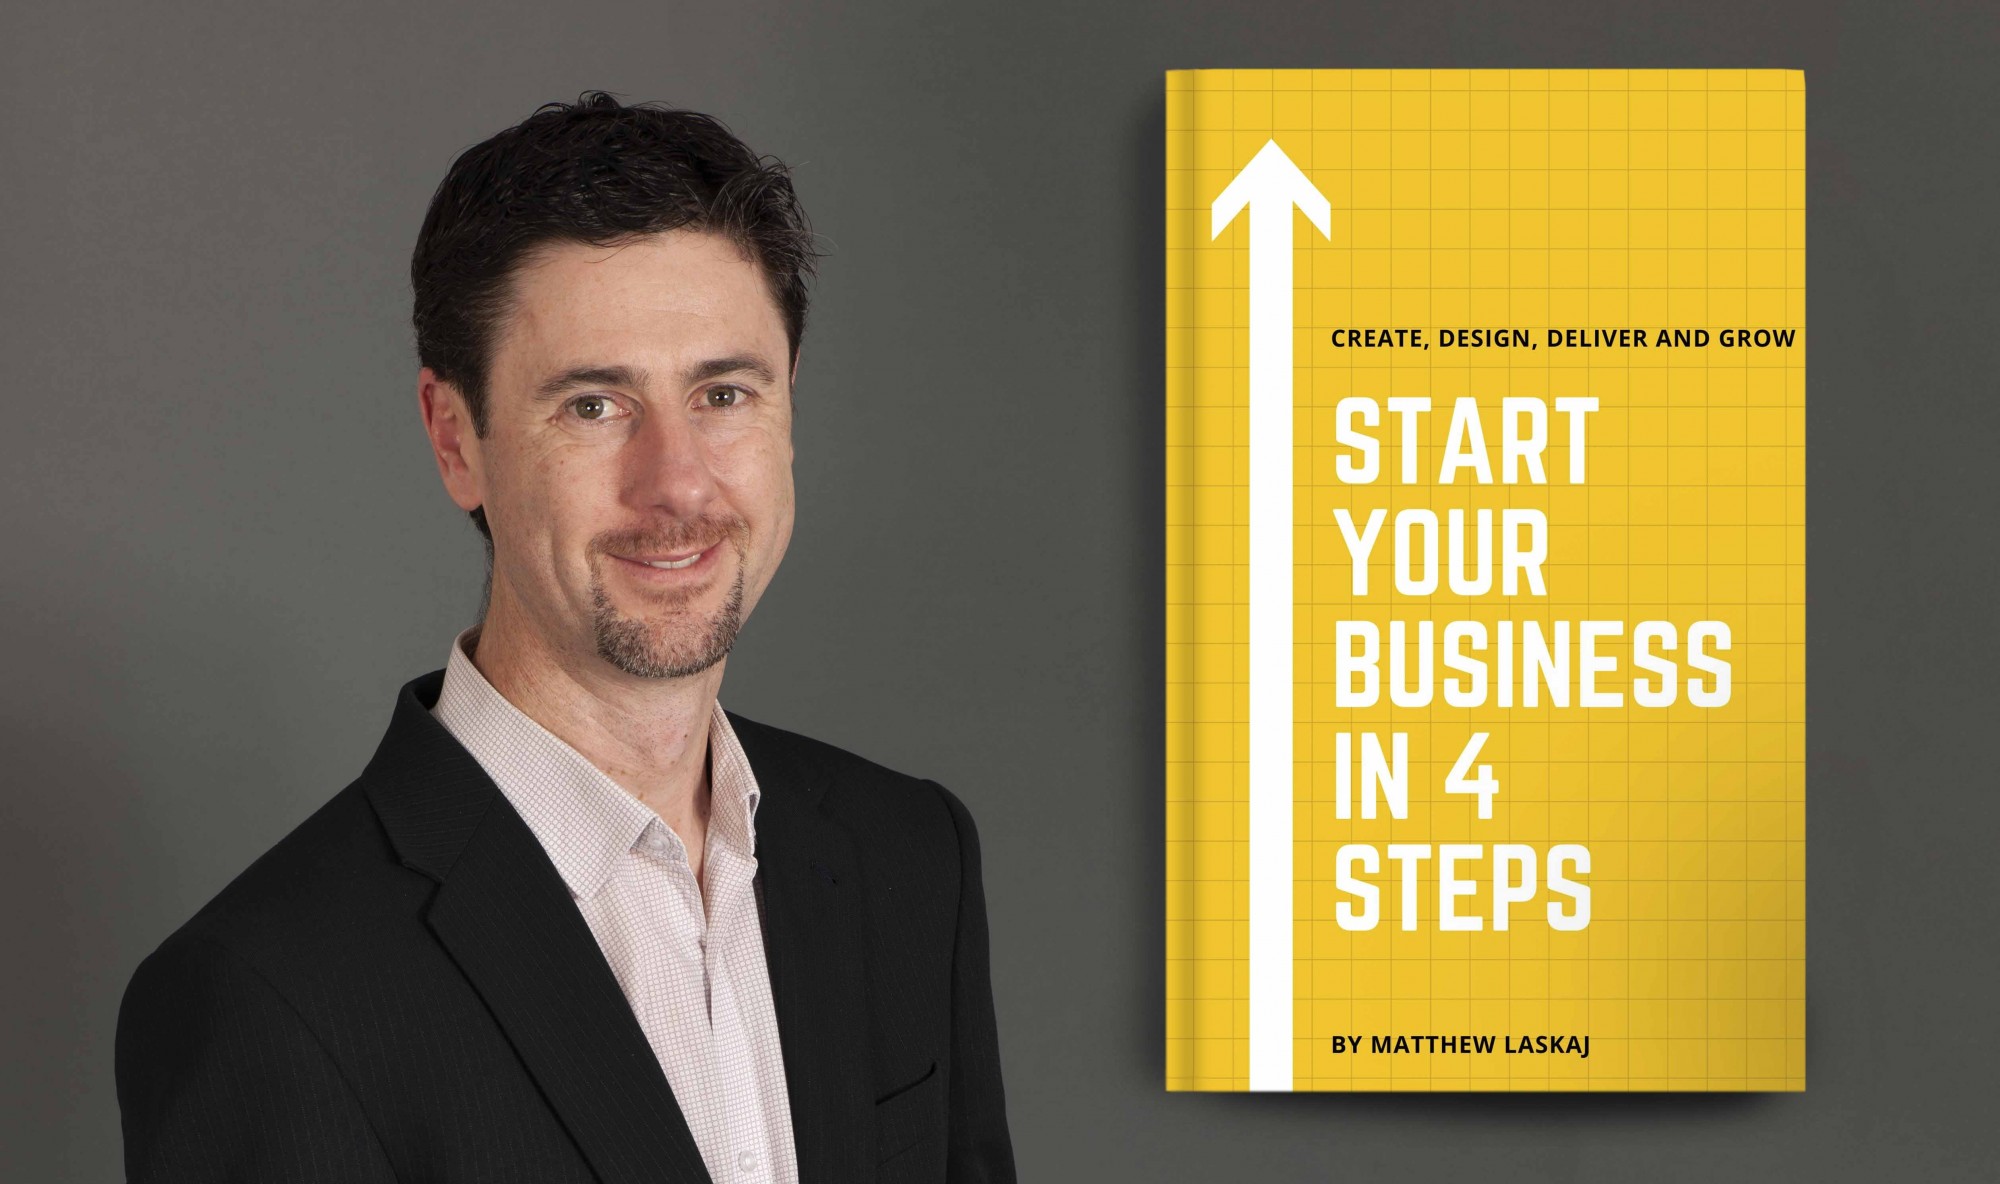 Chair of the Institution of Mechanical Engineers for Scotland launches new book called: “Start your business in 4 steps”